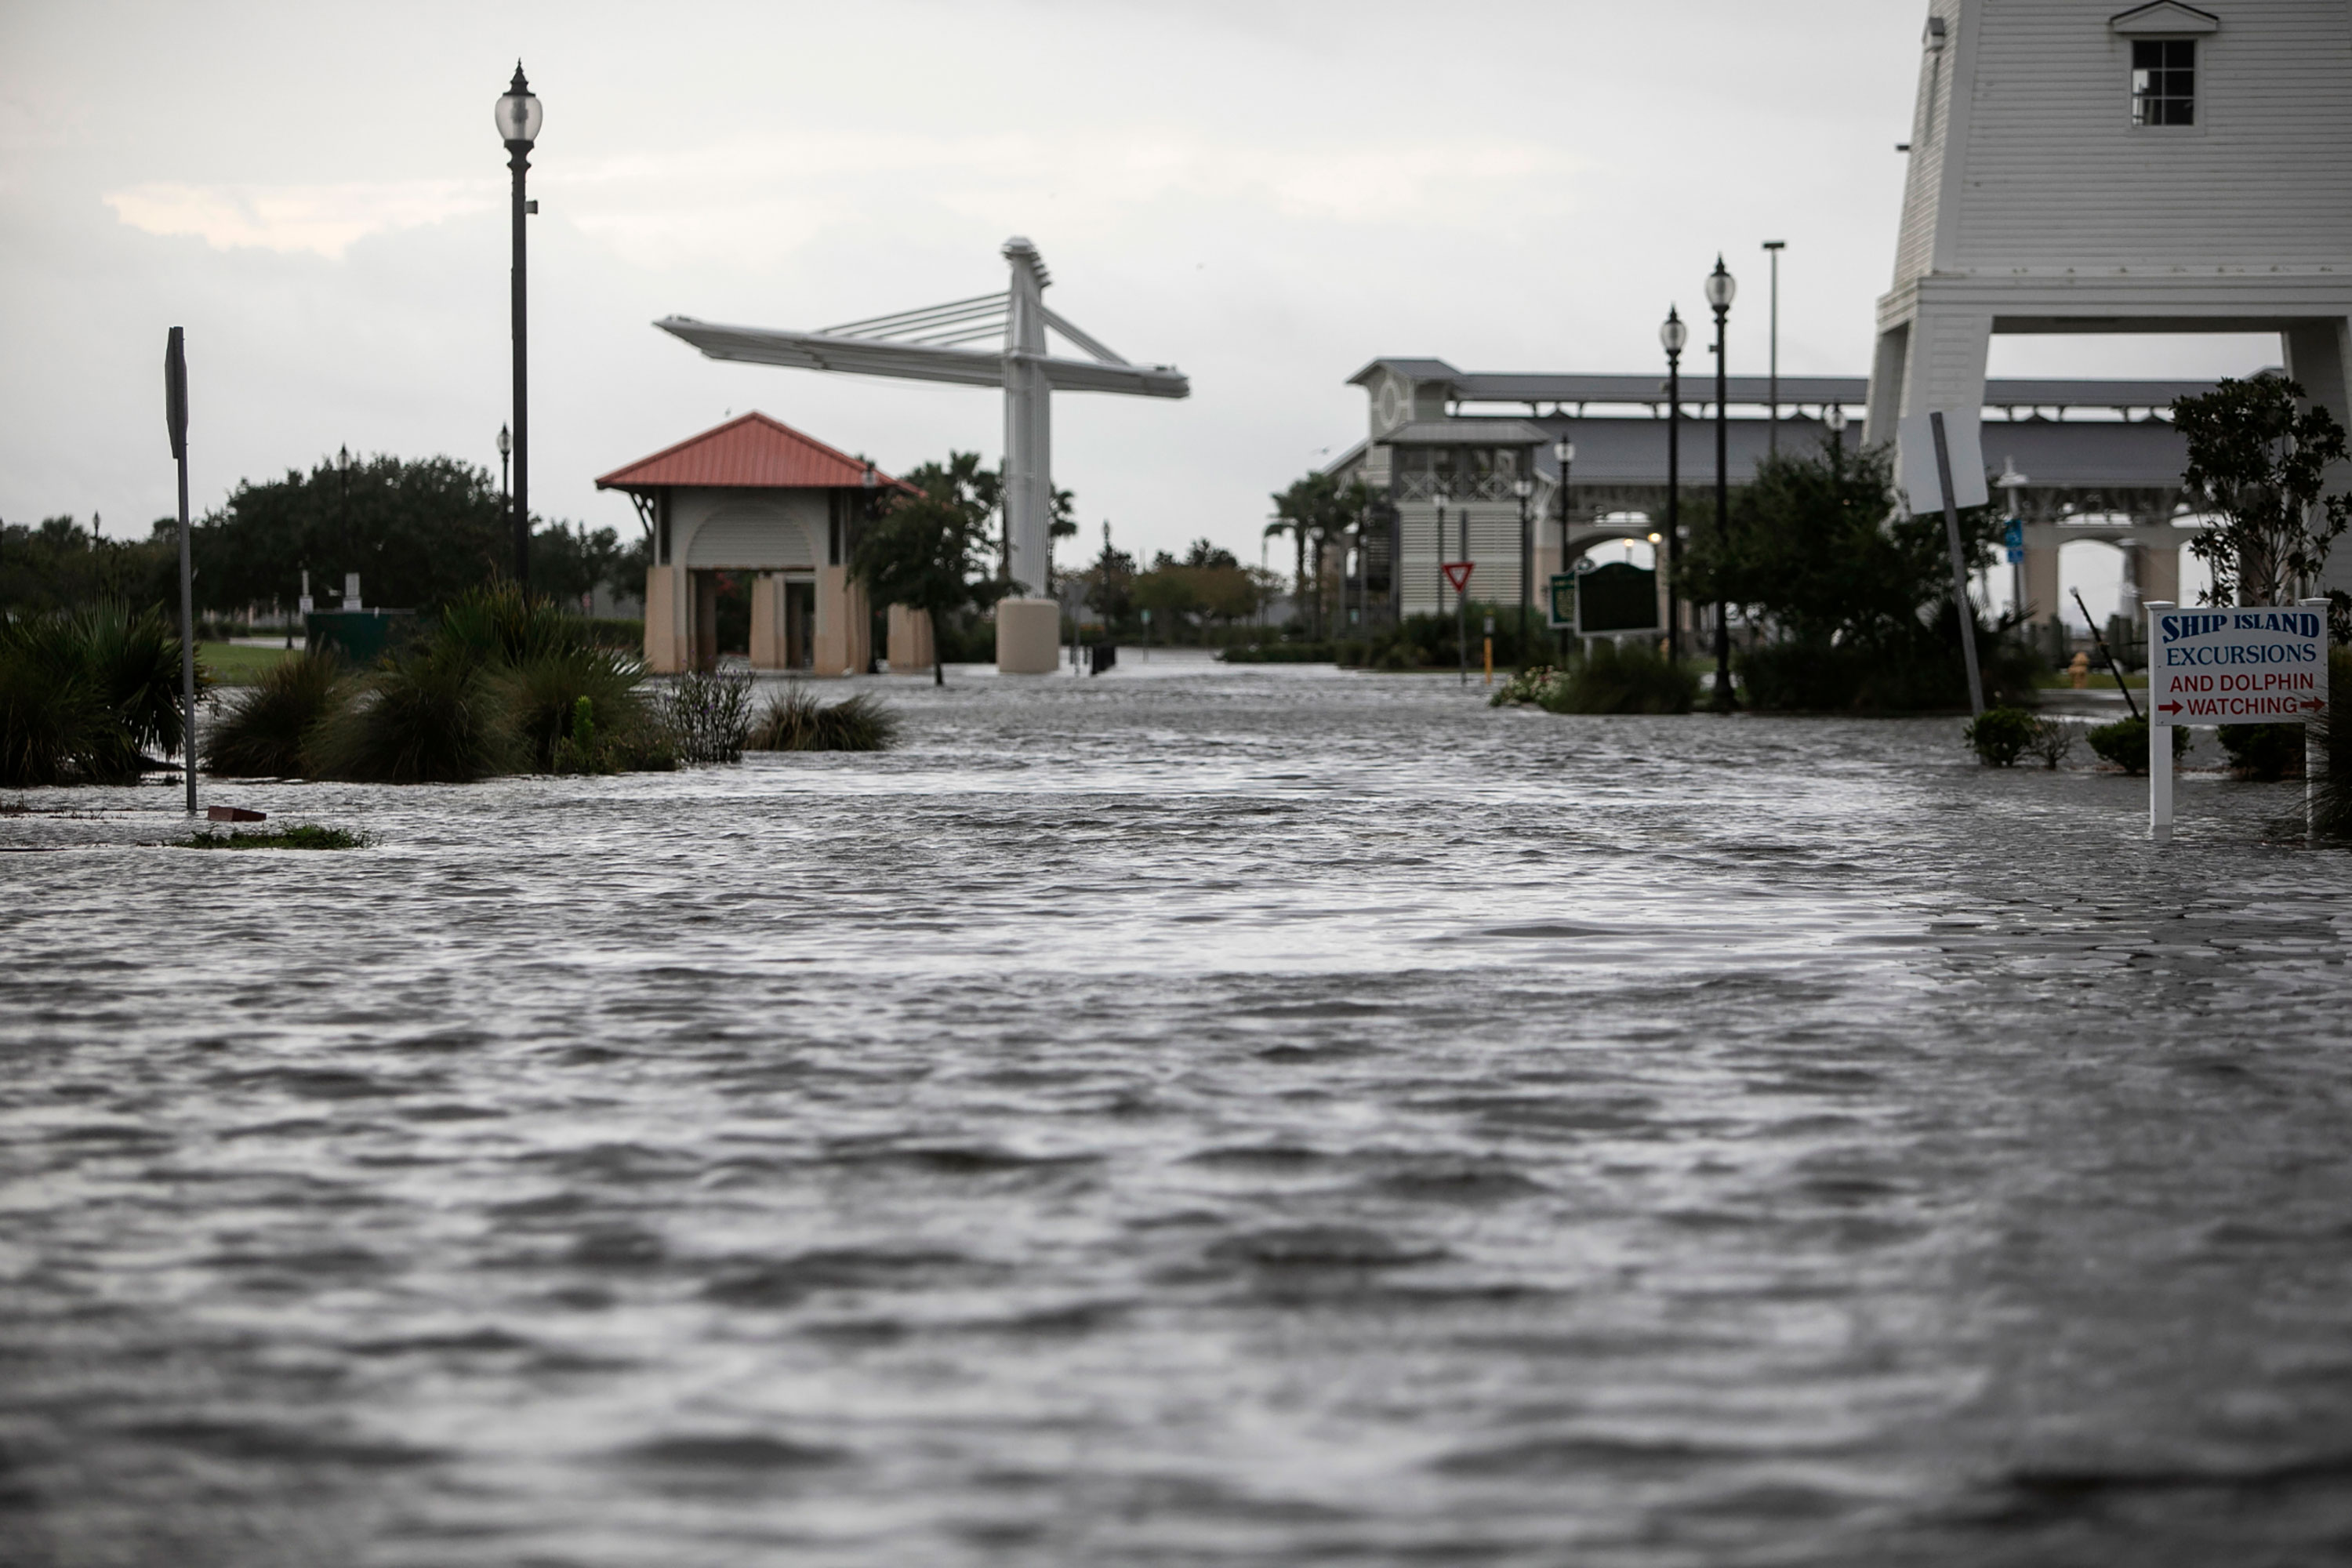 Jones Park in Gulfport, Mississippi, is flooded ahead of the storm's landfall on August 29, 2021.